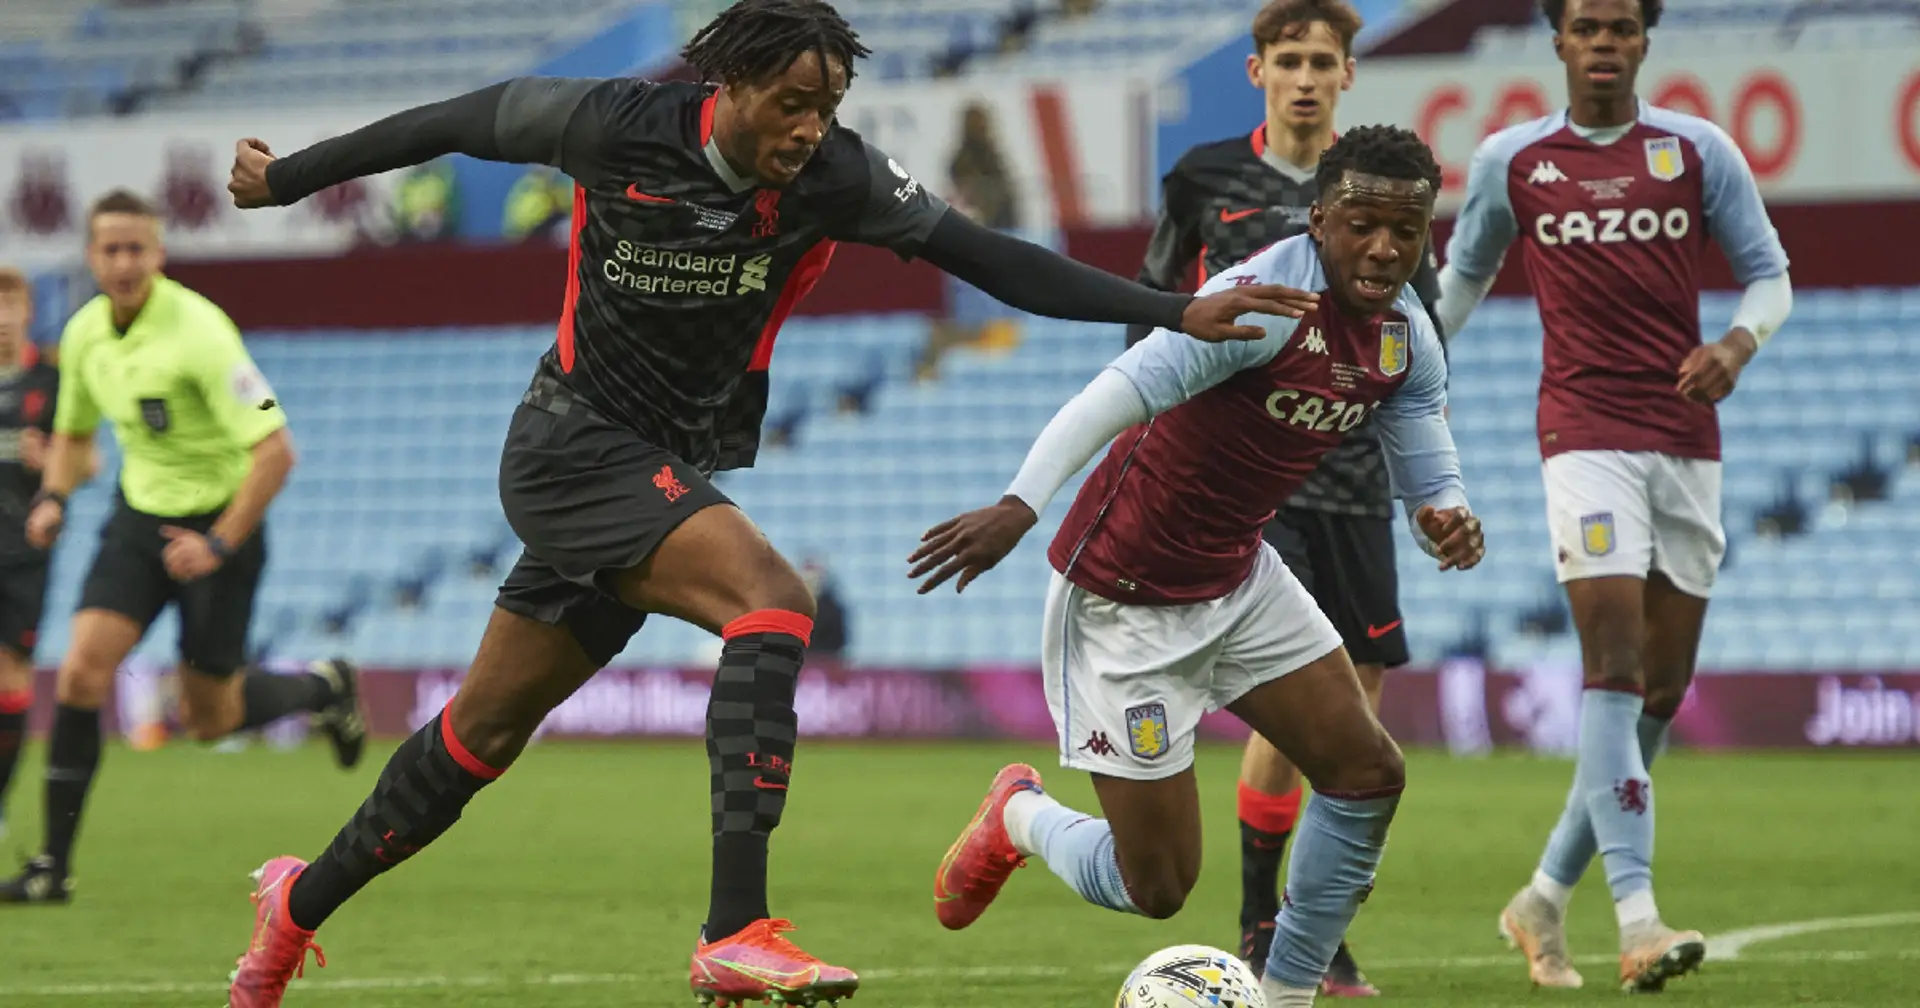 Young Reds face FA Youth Cup heartbreak following loss to Aston Villa in final 